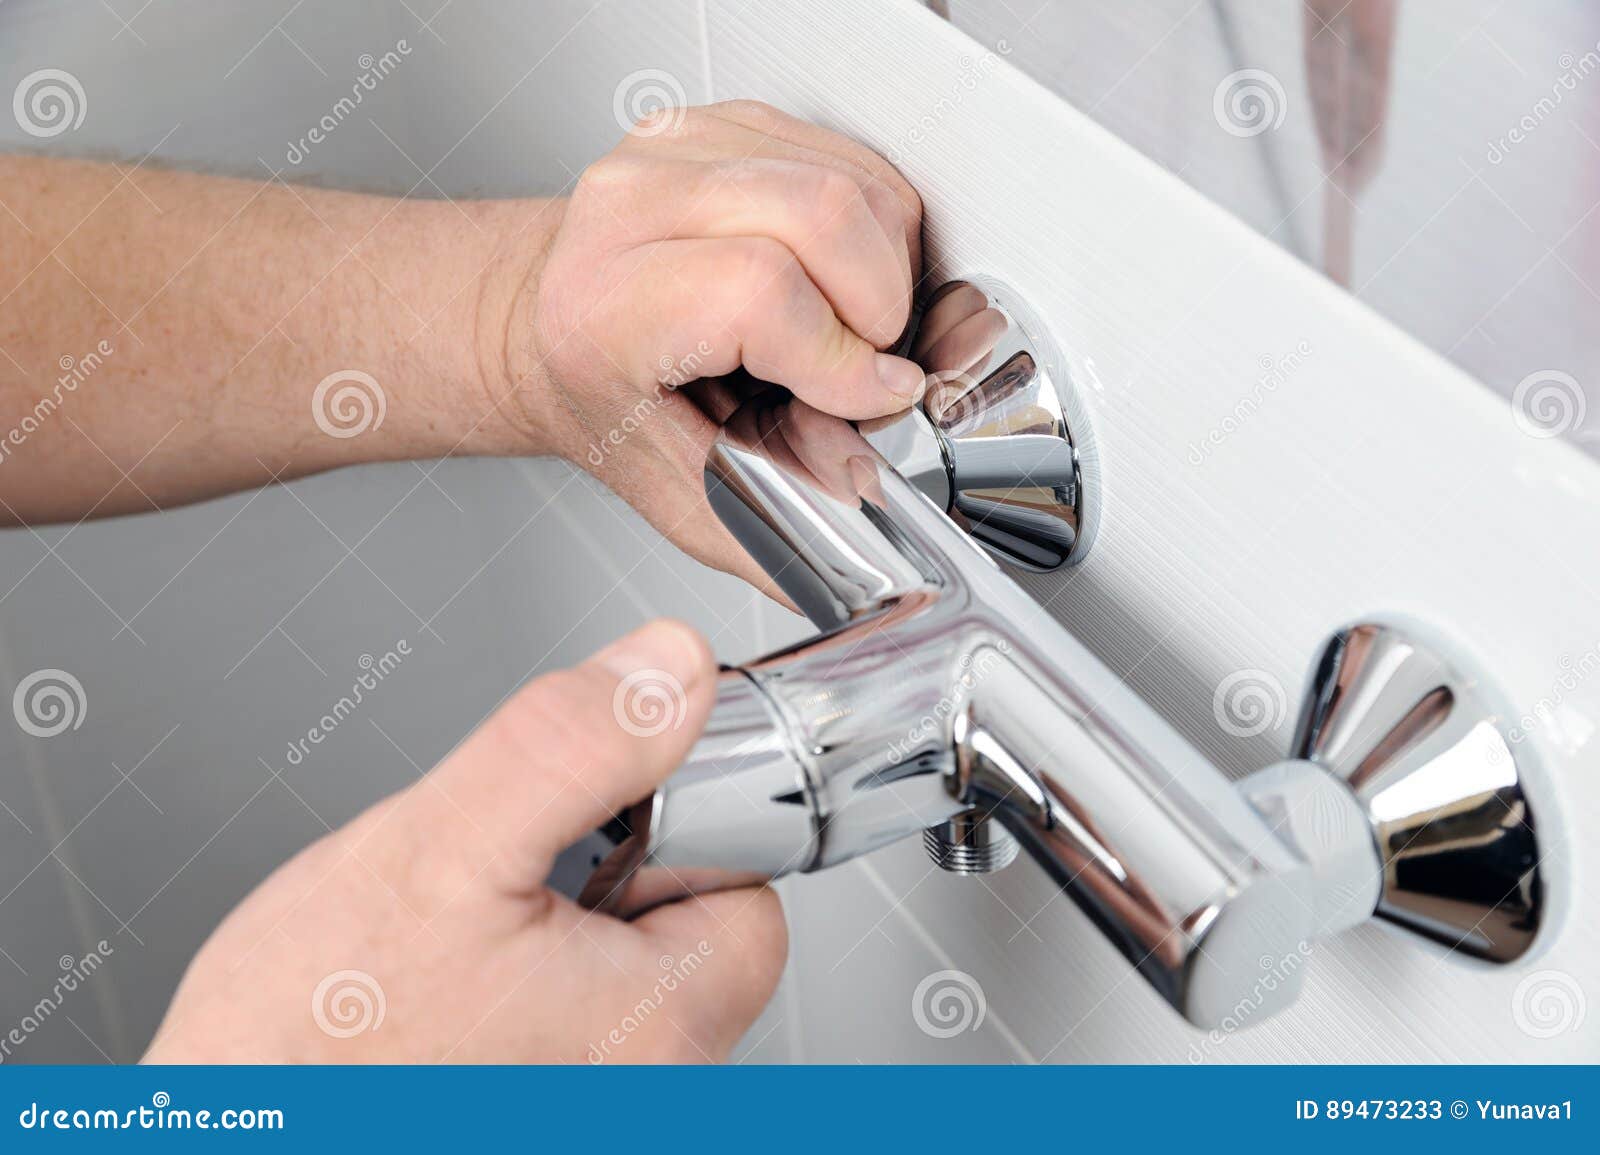 Installing A Shower Faucet Stock Image Image Of Rotate Metal